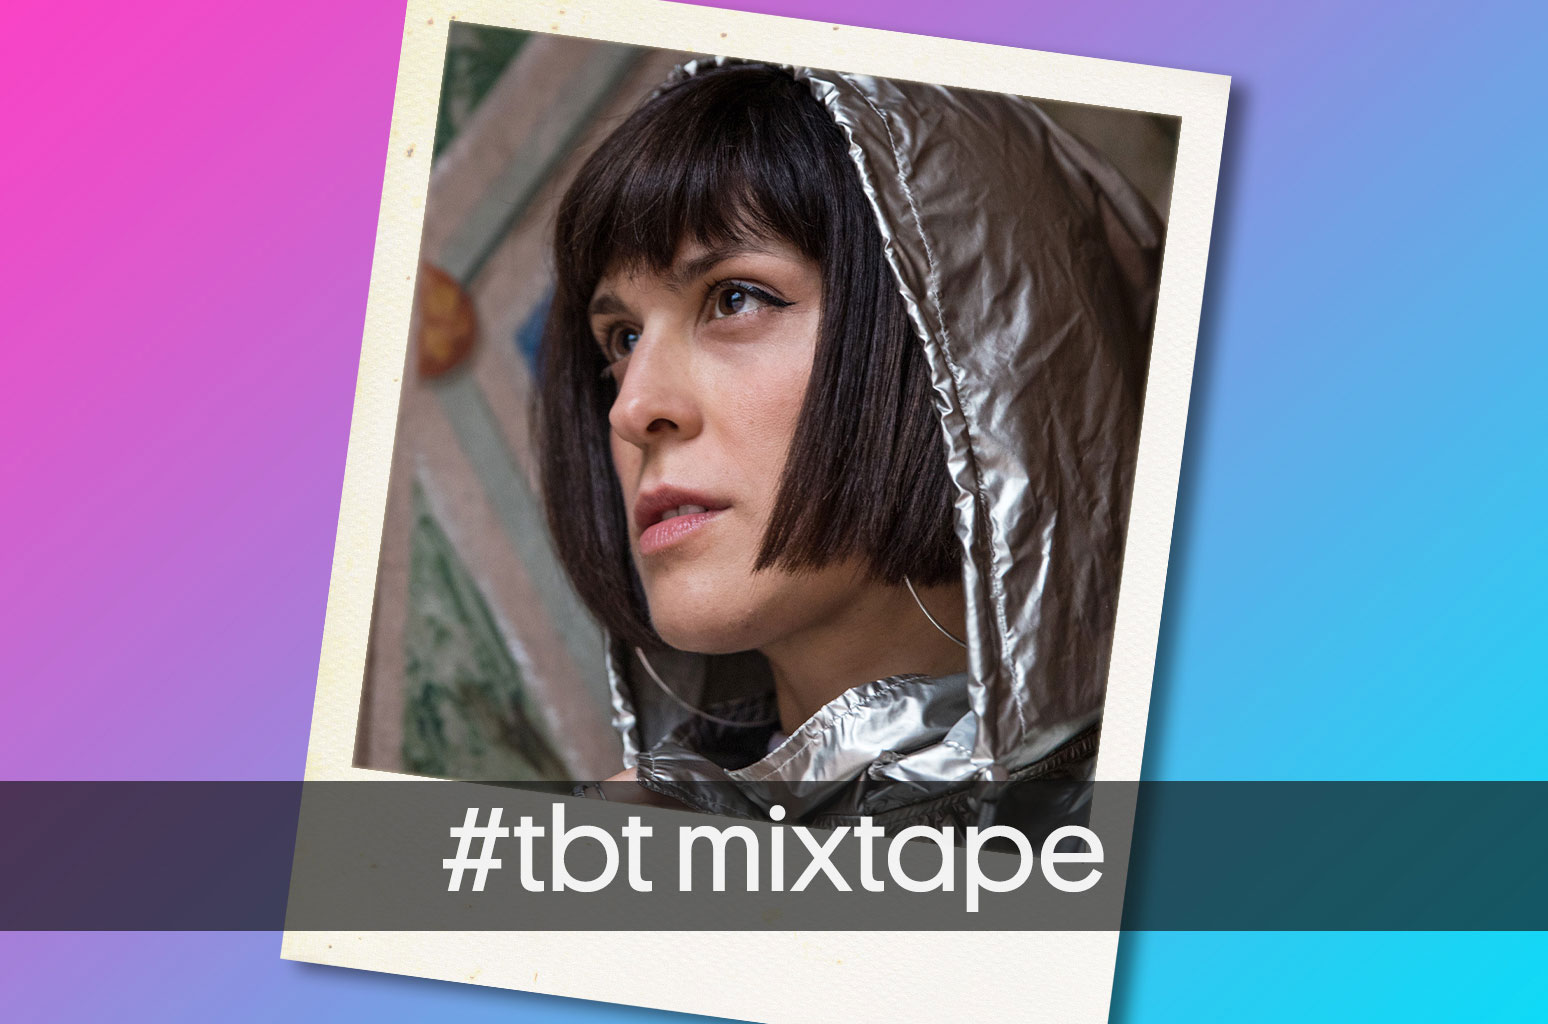 Listen to Rapper-Singer Dessa's 'Lucid' #TBT Mixtape: 'What Hits You Younger, Hits You Hard' - www.billboard.com - Minnesota